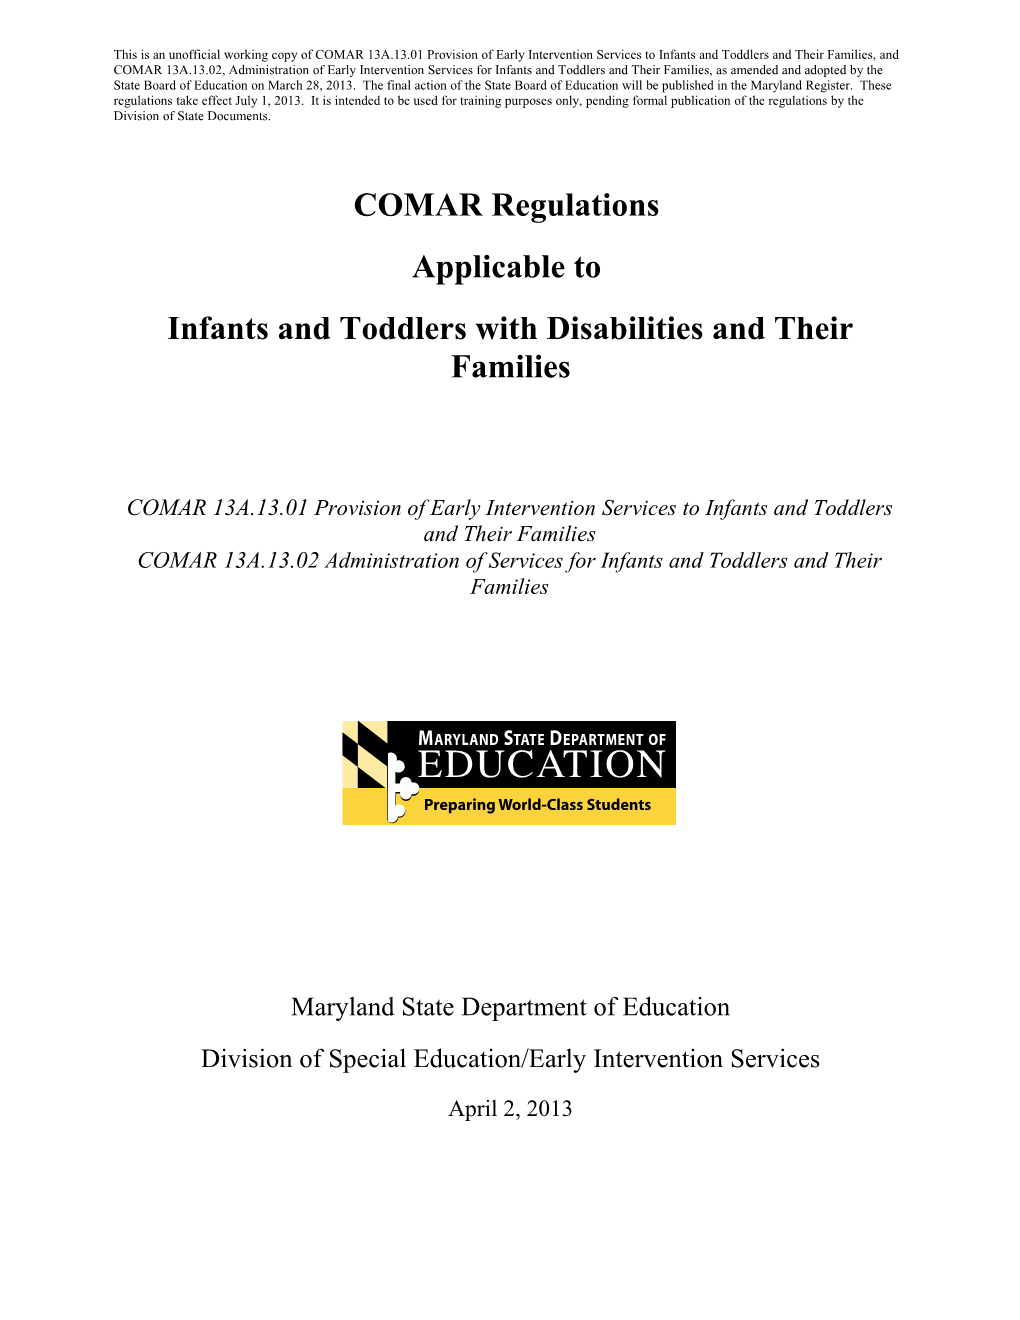 Infants and Toddlers with Disabilities and Their Families